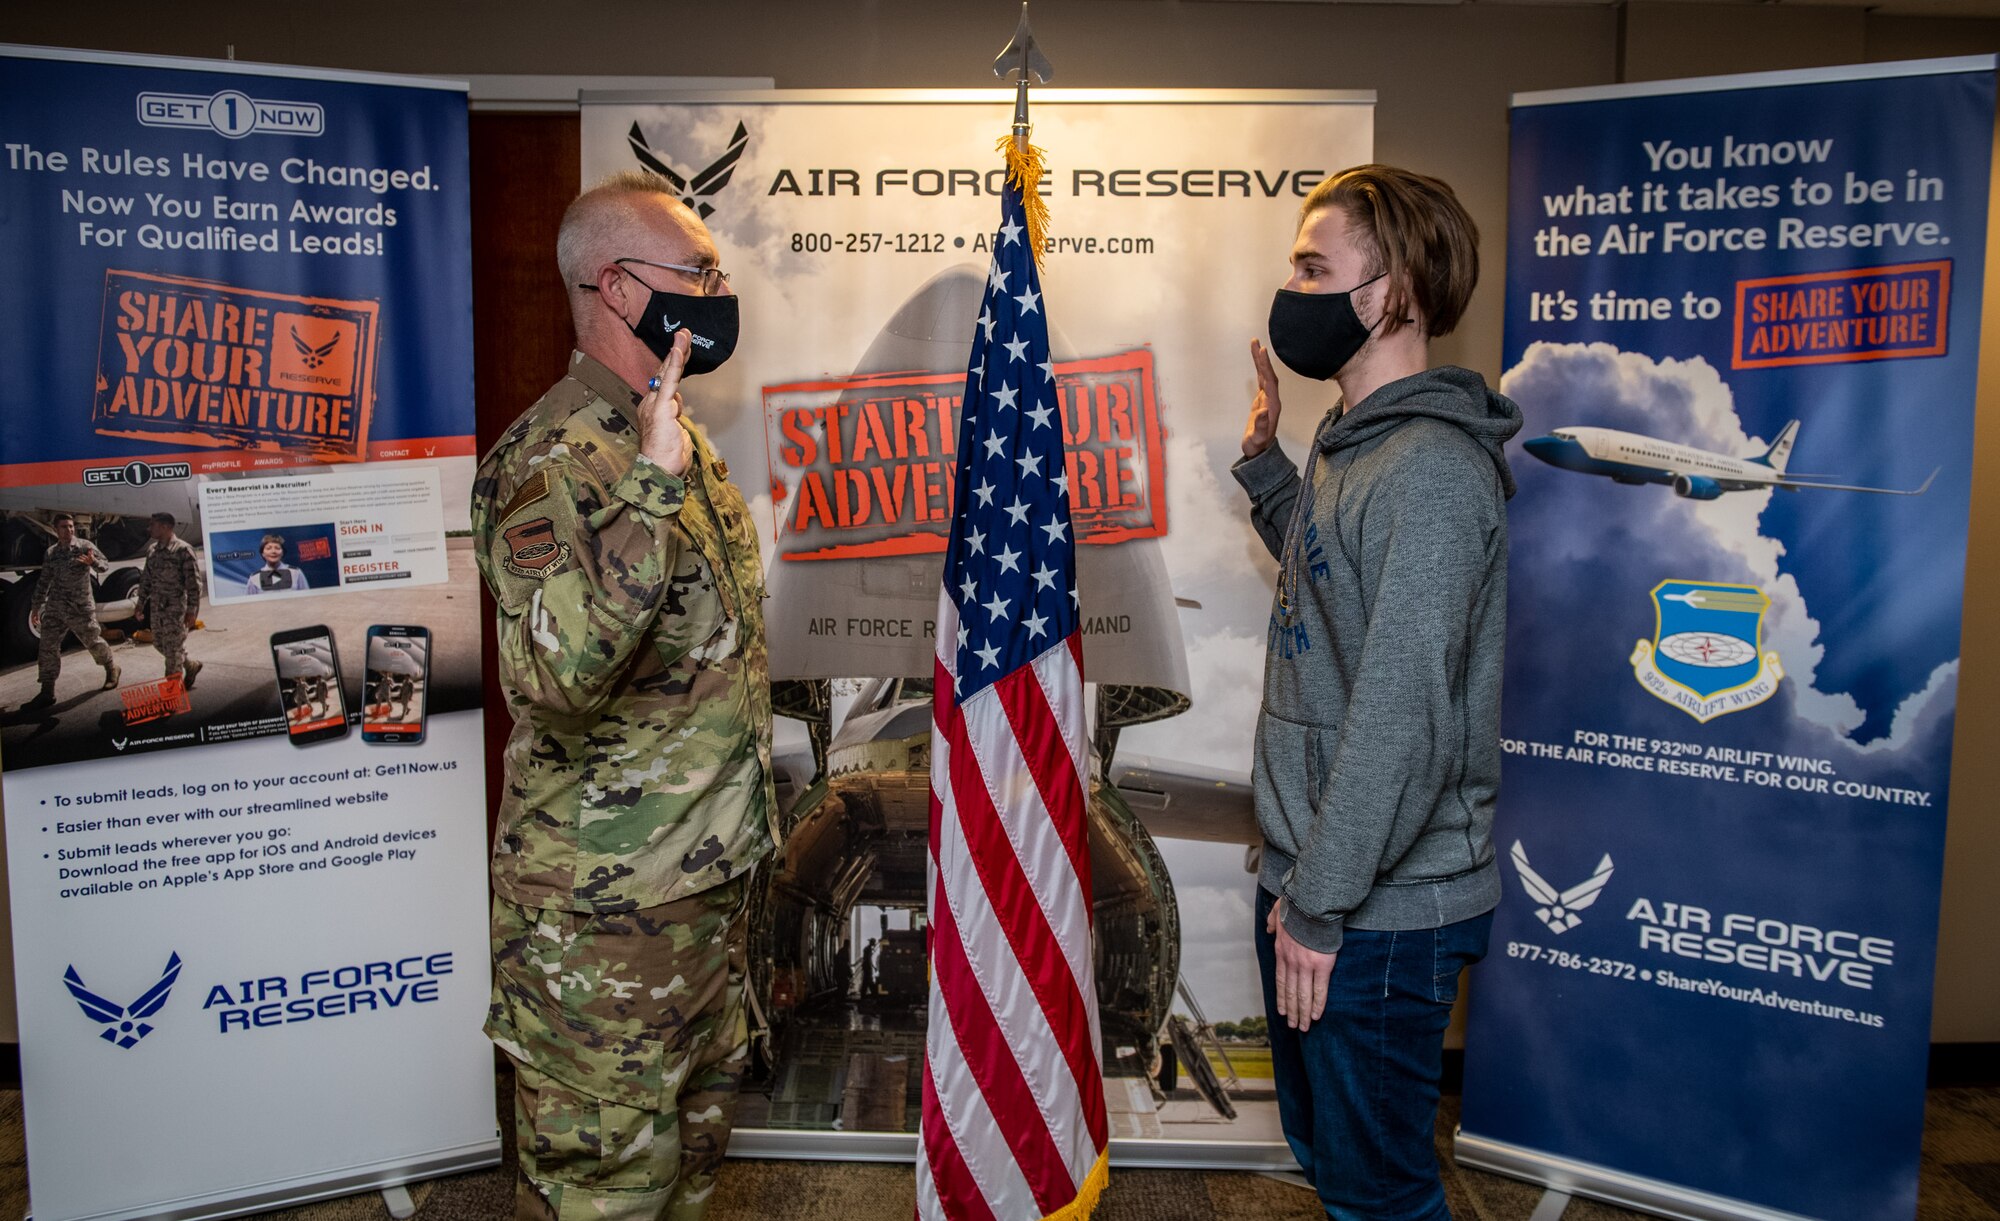 Bryce Ossman, newest recruit to join the 932nd Airlift Wing, recites the oath of enlistment given by Lt. Col. Stan Paregien, 932nd Airlift Wing Public Affairs Officer, during an enlistment ceremony, April 8, 2021, at the 932nd AW Headquarters building, Scott Air Force Base, Illinois. (U.S. Air Force photo by Christopher Parr)